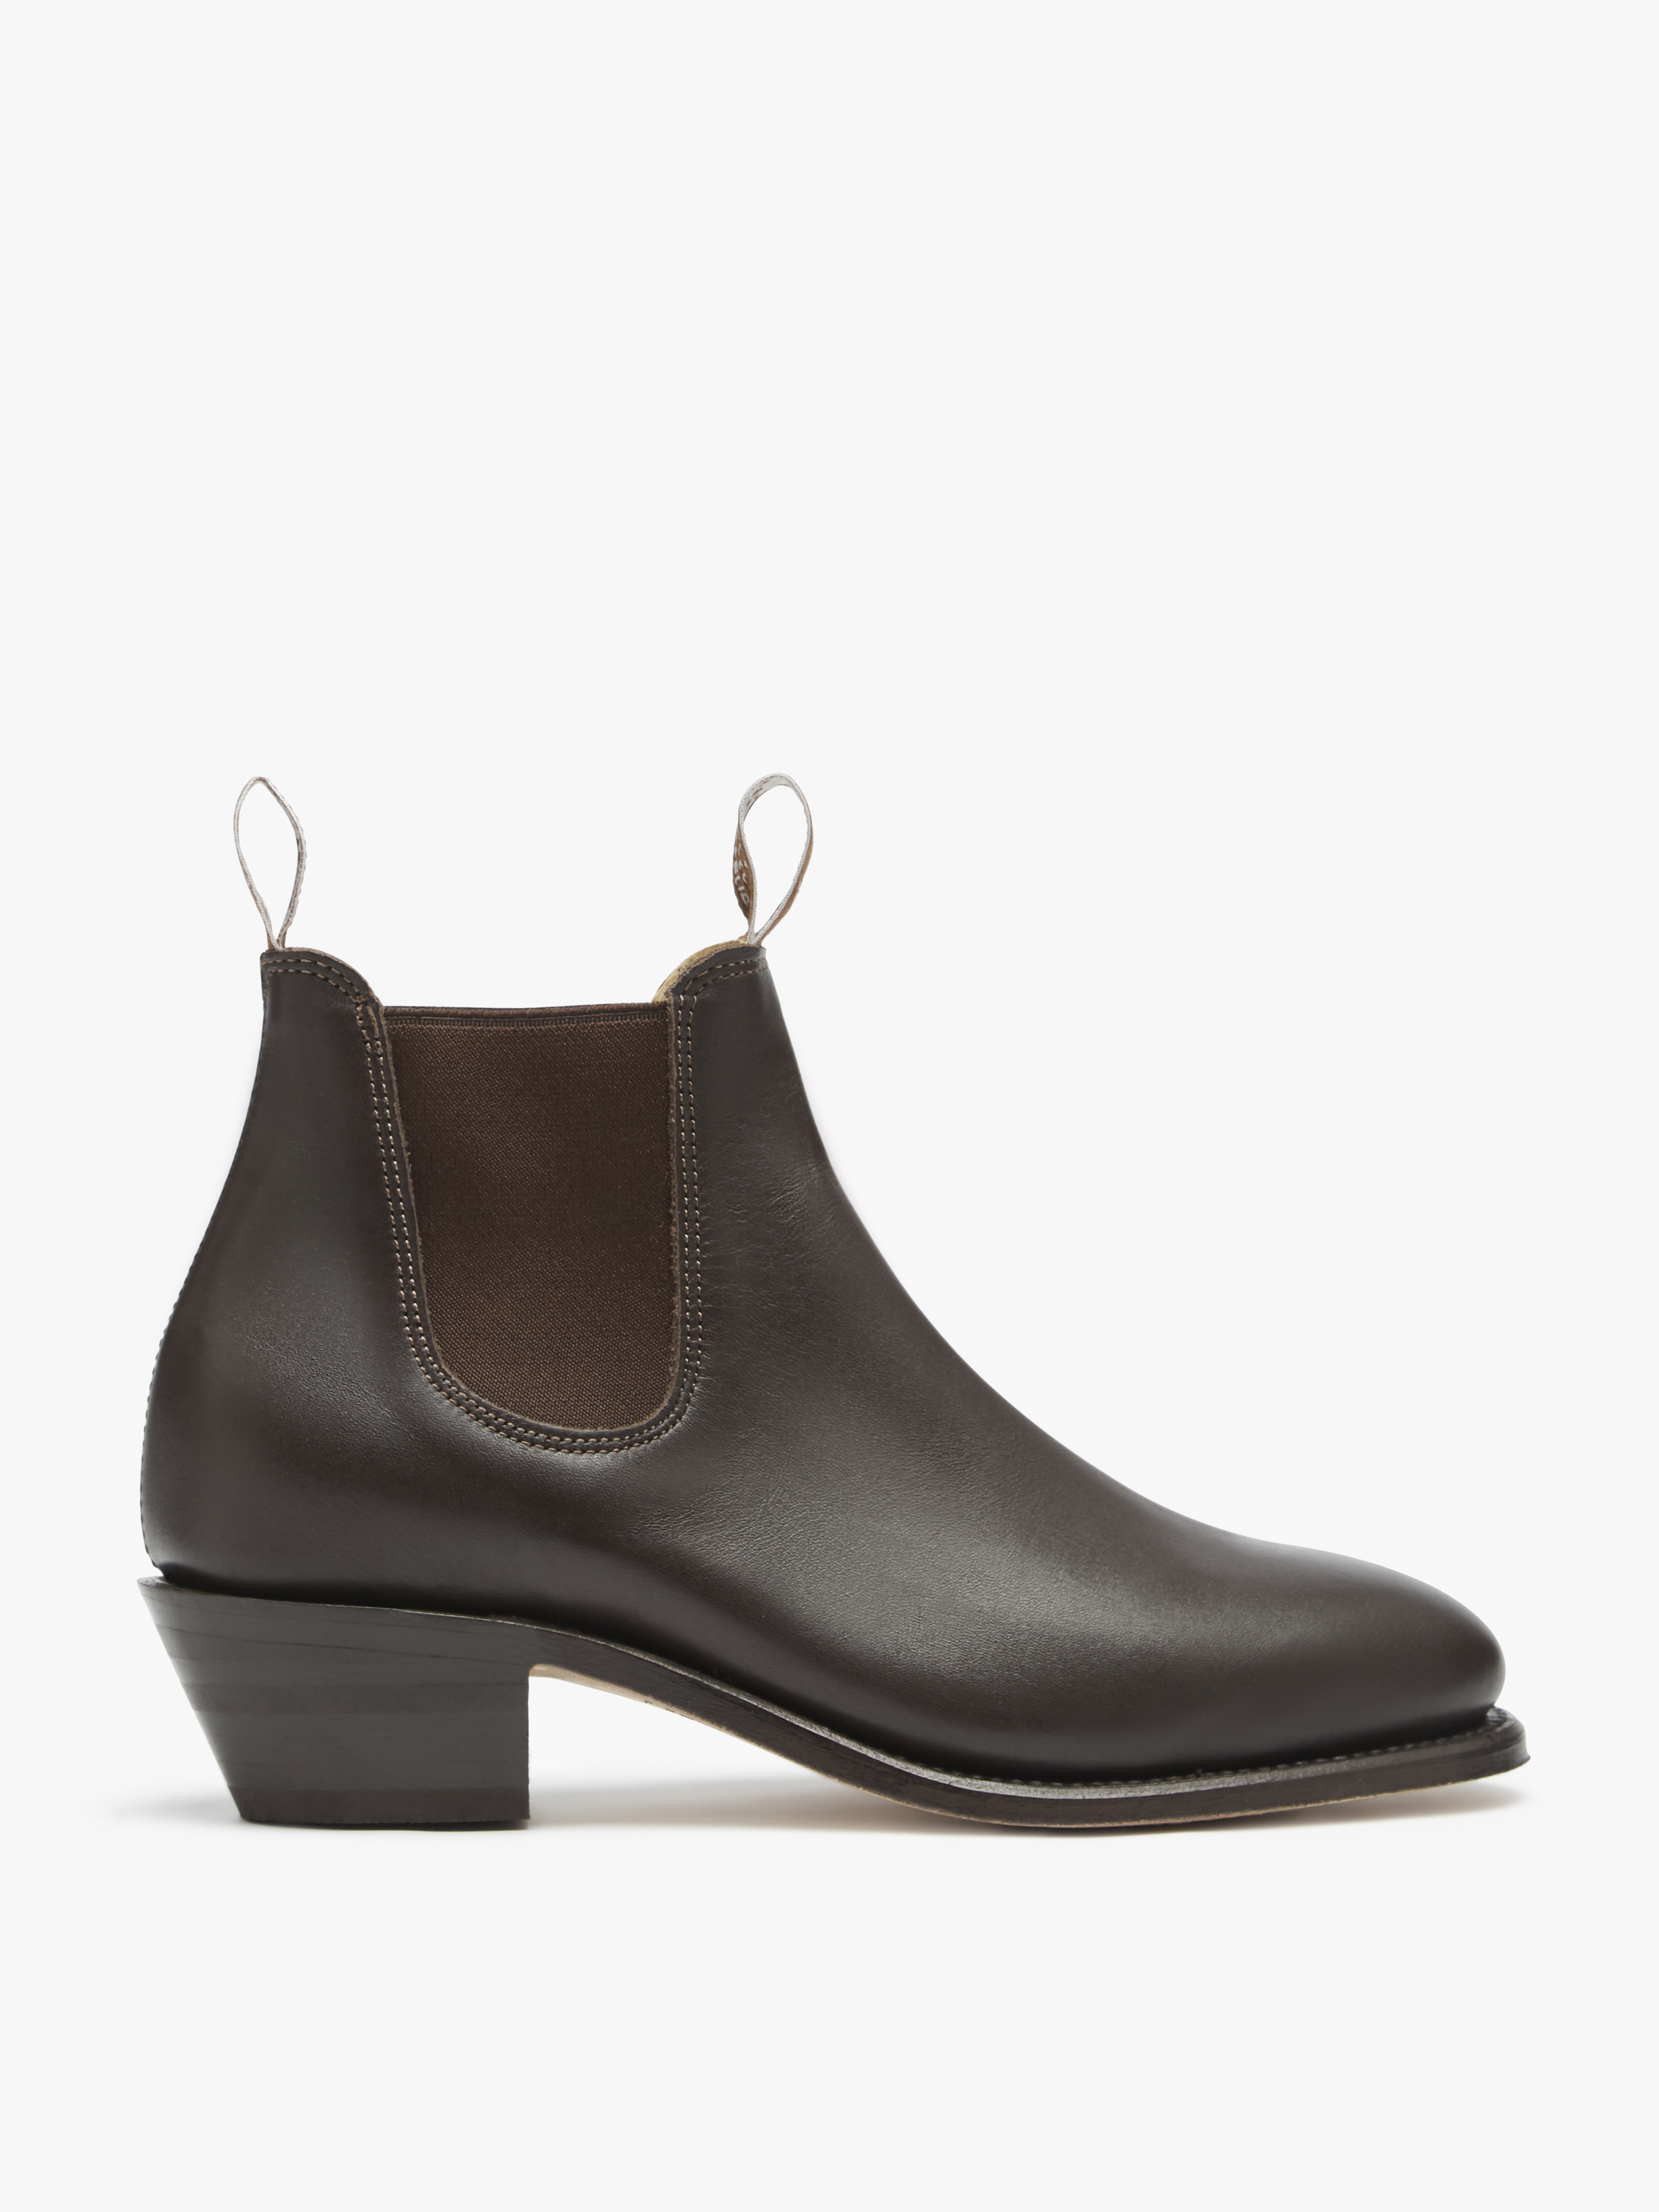 Chestnut Adelaide Cuban Heel Boots | R.M.Williams Chelsea Boots | R.M ...